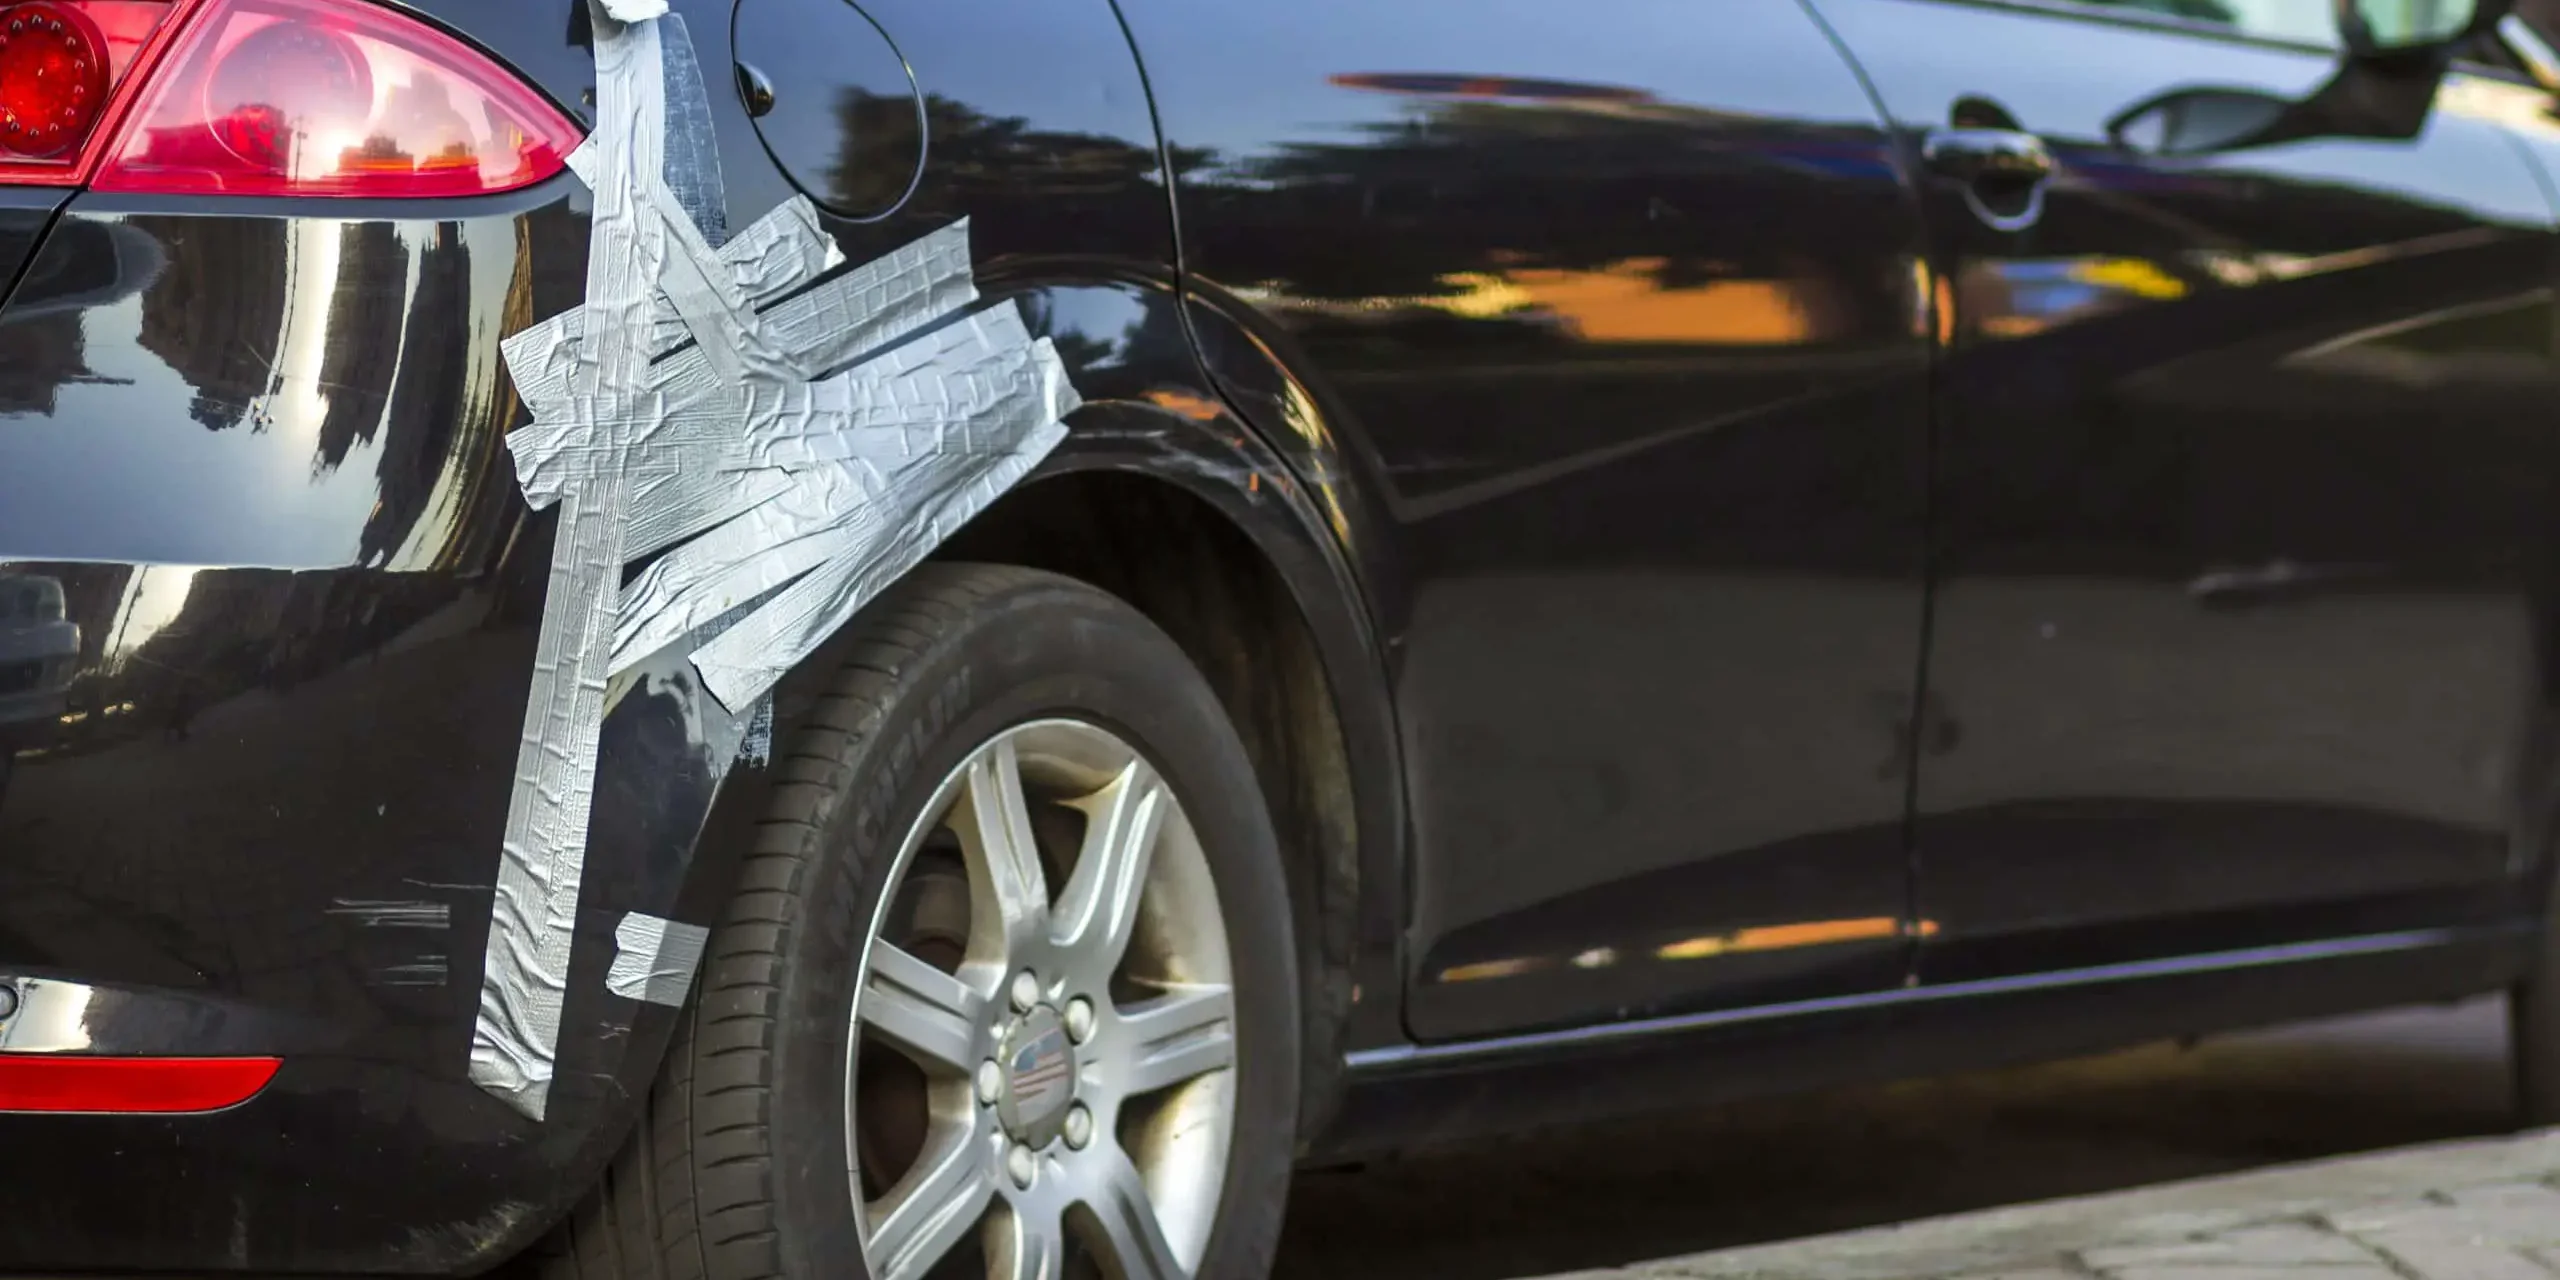 How-To-Remove-Duct-Tape-Residue-From-Car-Featured-scaled-1